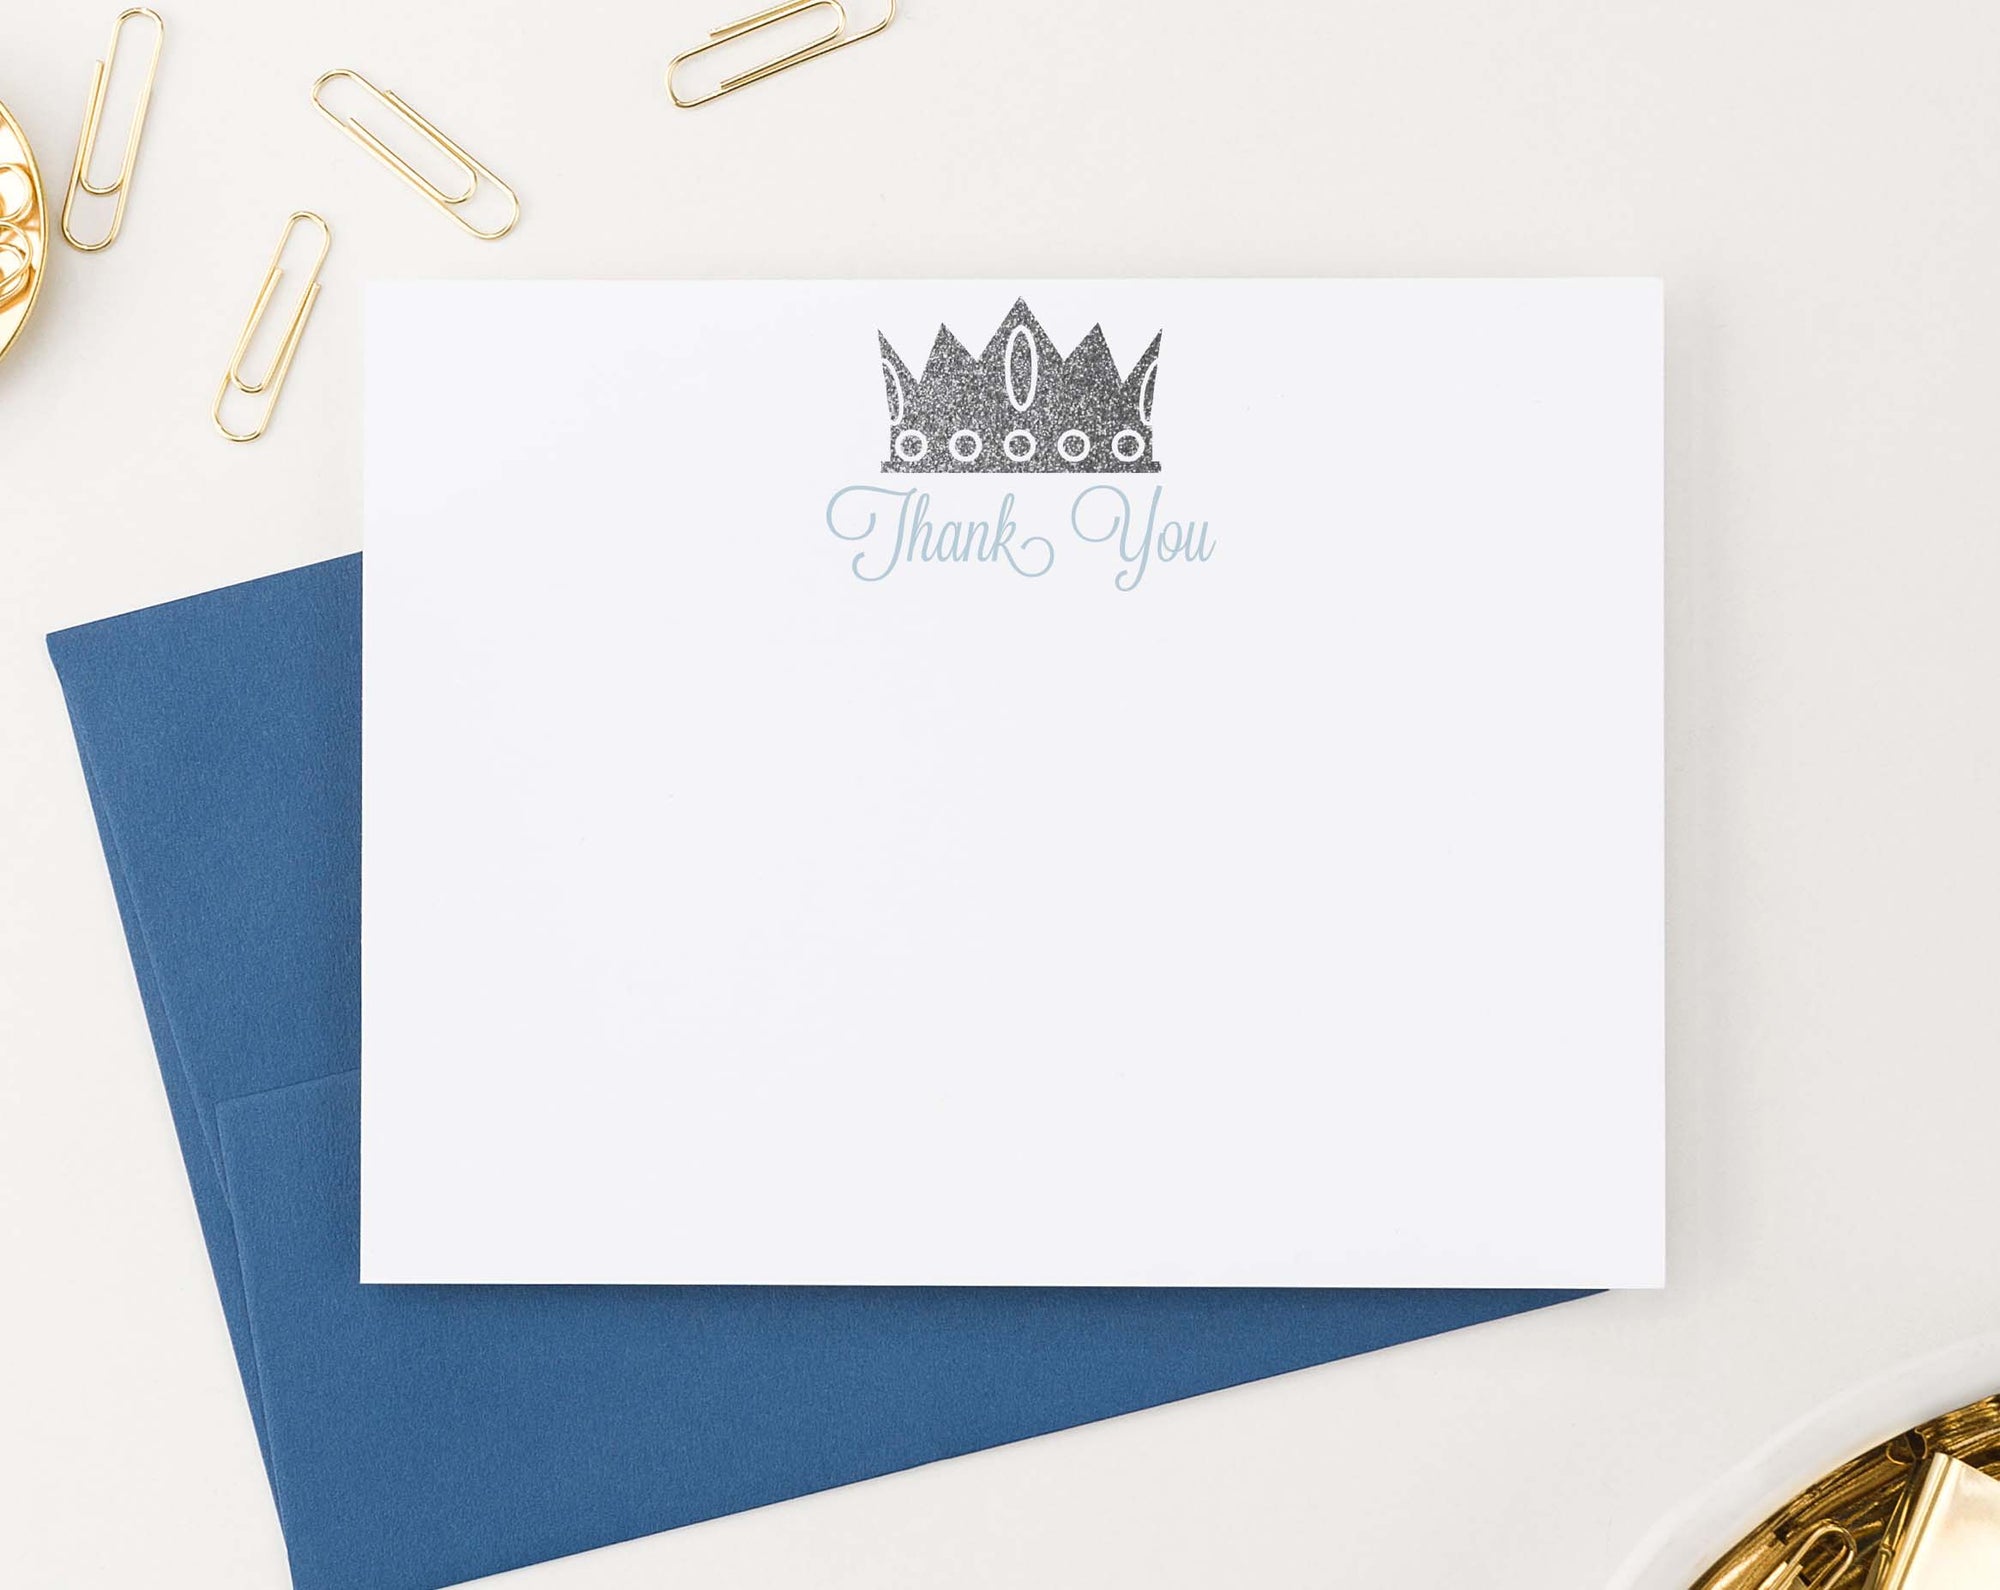 Paper Clever Party Navy and Gold Baby Shower Thank You Cards with Envelopes Boys Blank Prefilled Note Thanking for Gifts, Royal Prince Stationery